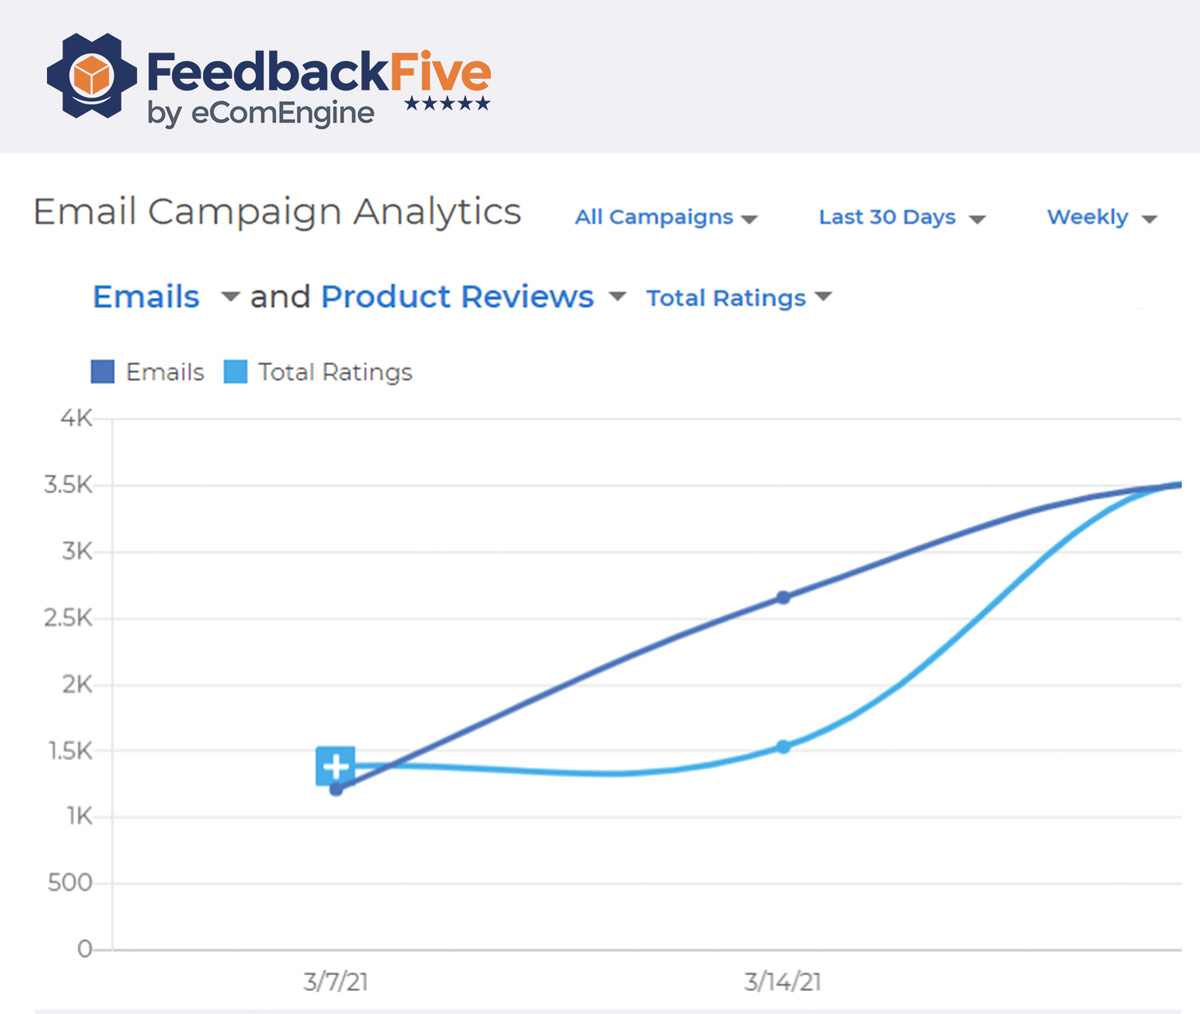 Email campaign analytics graph showing total ratings in FeedbackFive